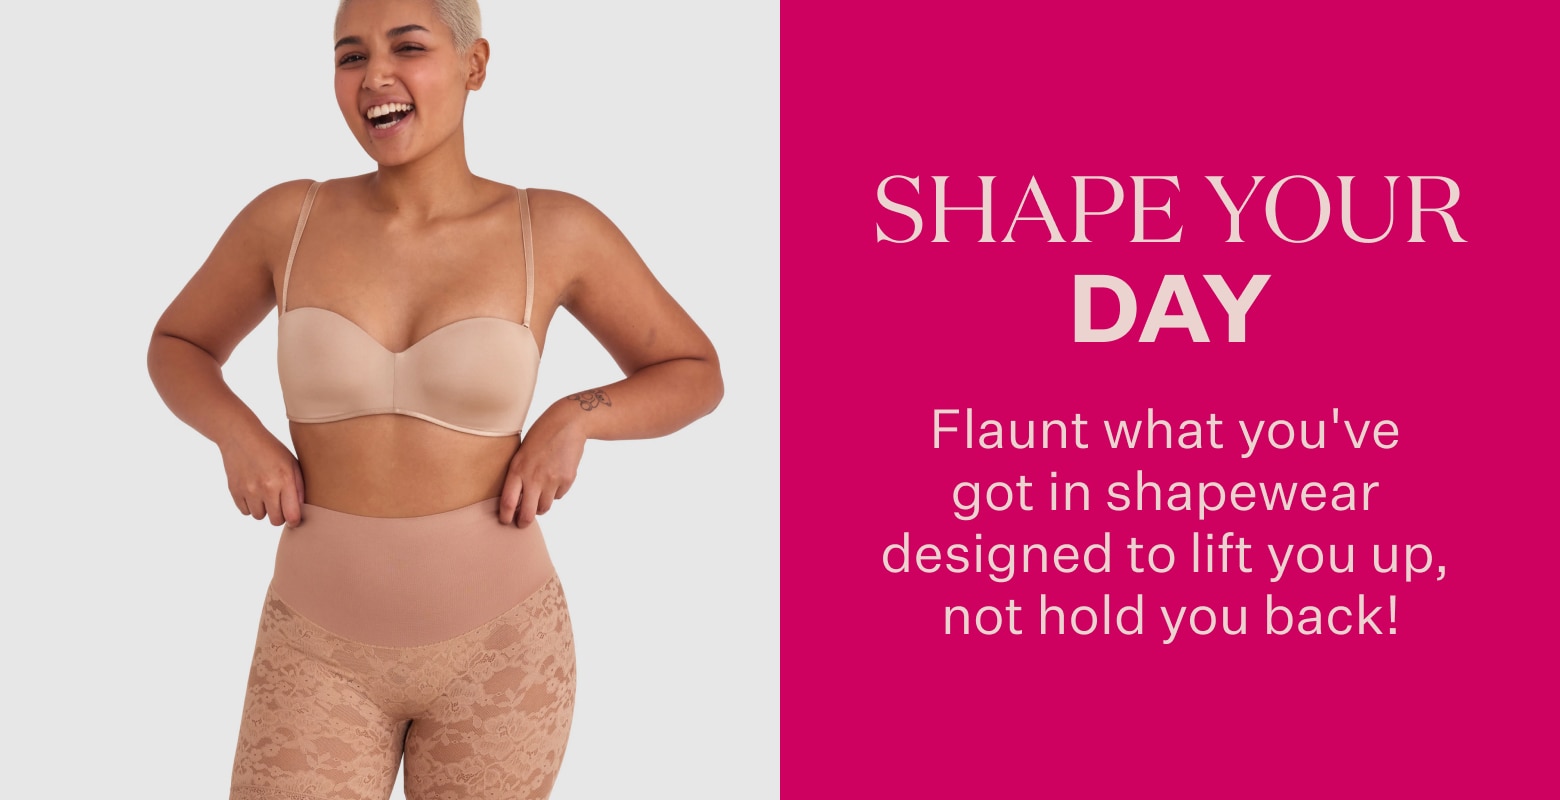 Shape your day. Flaunt what you've got in shapewear designed to lift you up, not hold you back!